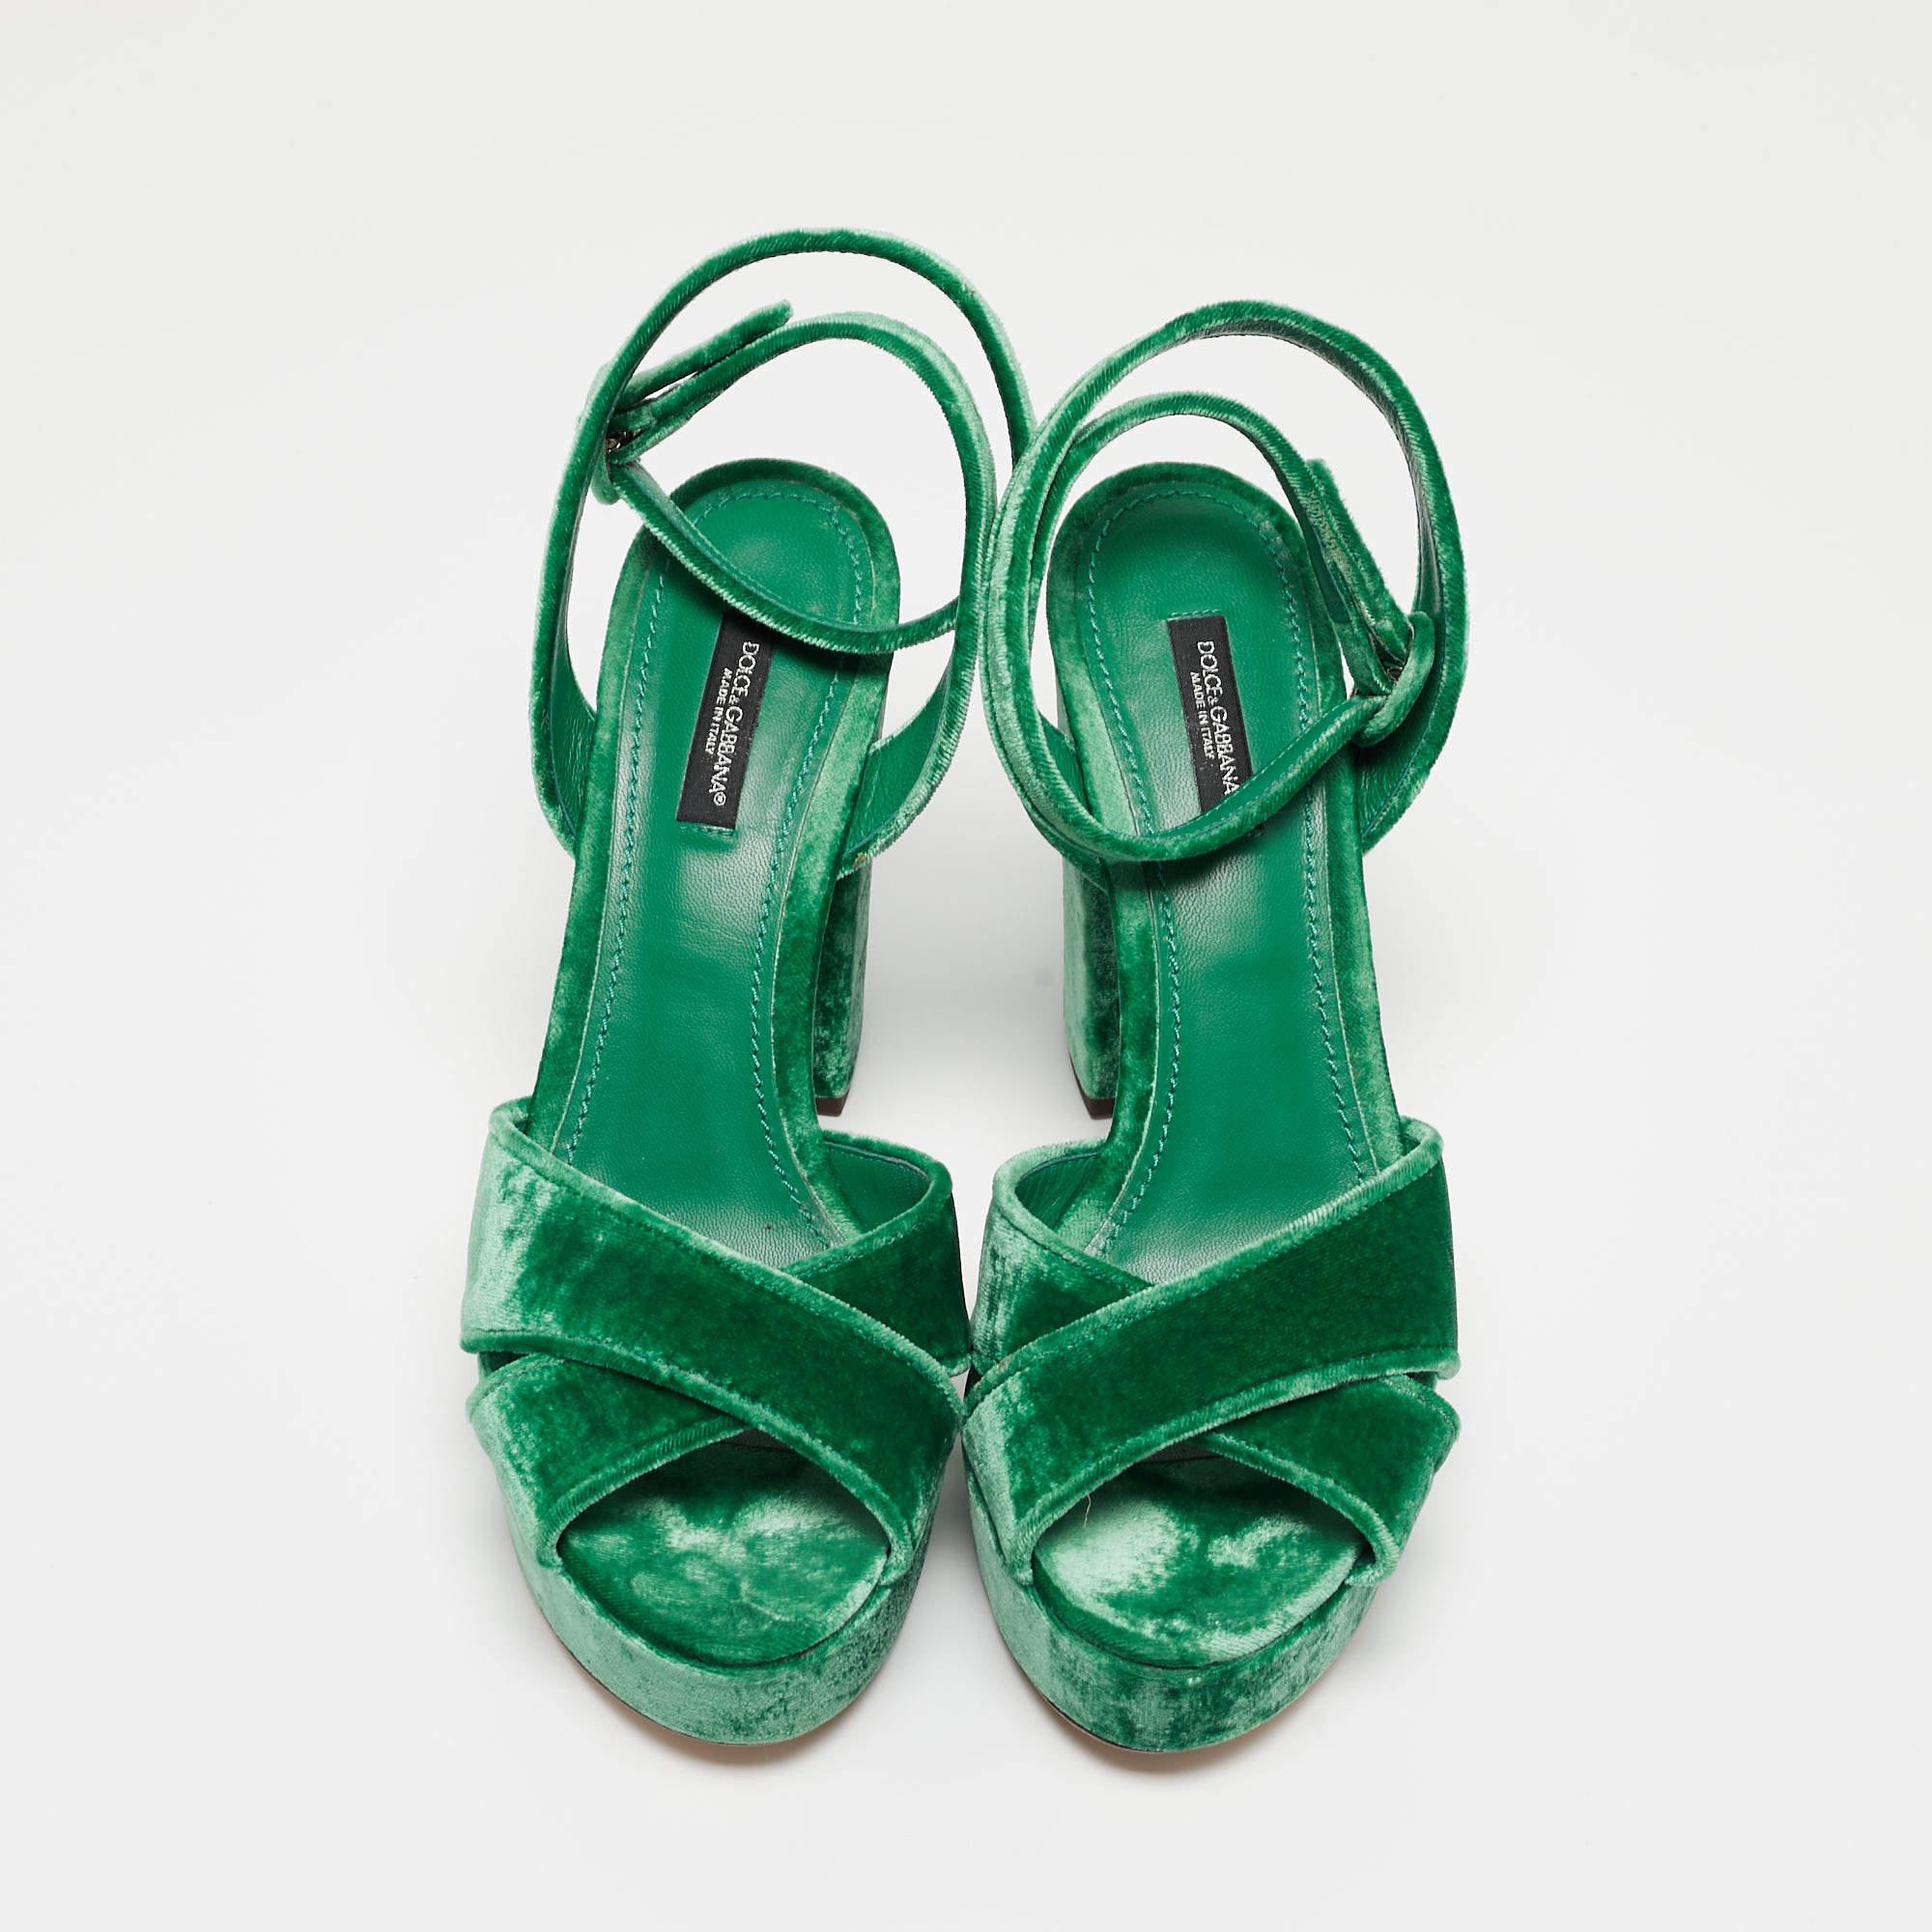 Make a statement with these Dolce & Gabbana green sandals for women. Impeccably crafted, these chic heels offer both fashion and comfort, elevating your look with each graceful step.

Includes: Original Dustbag, Original Box

